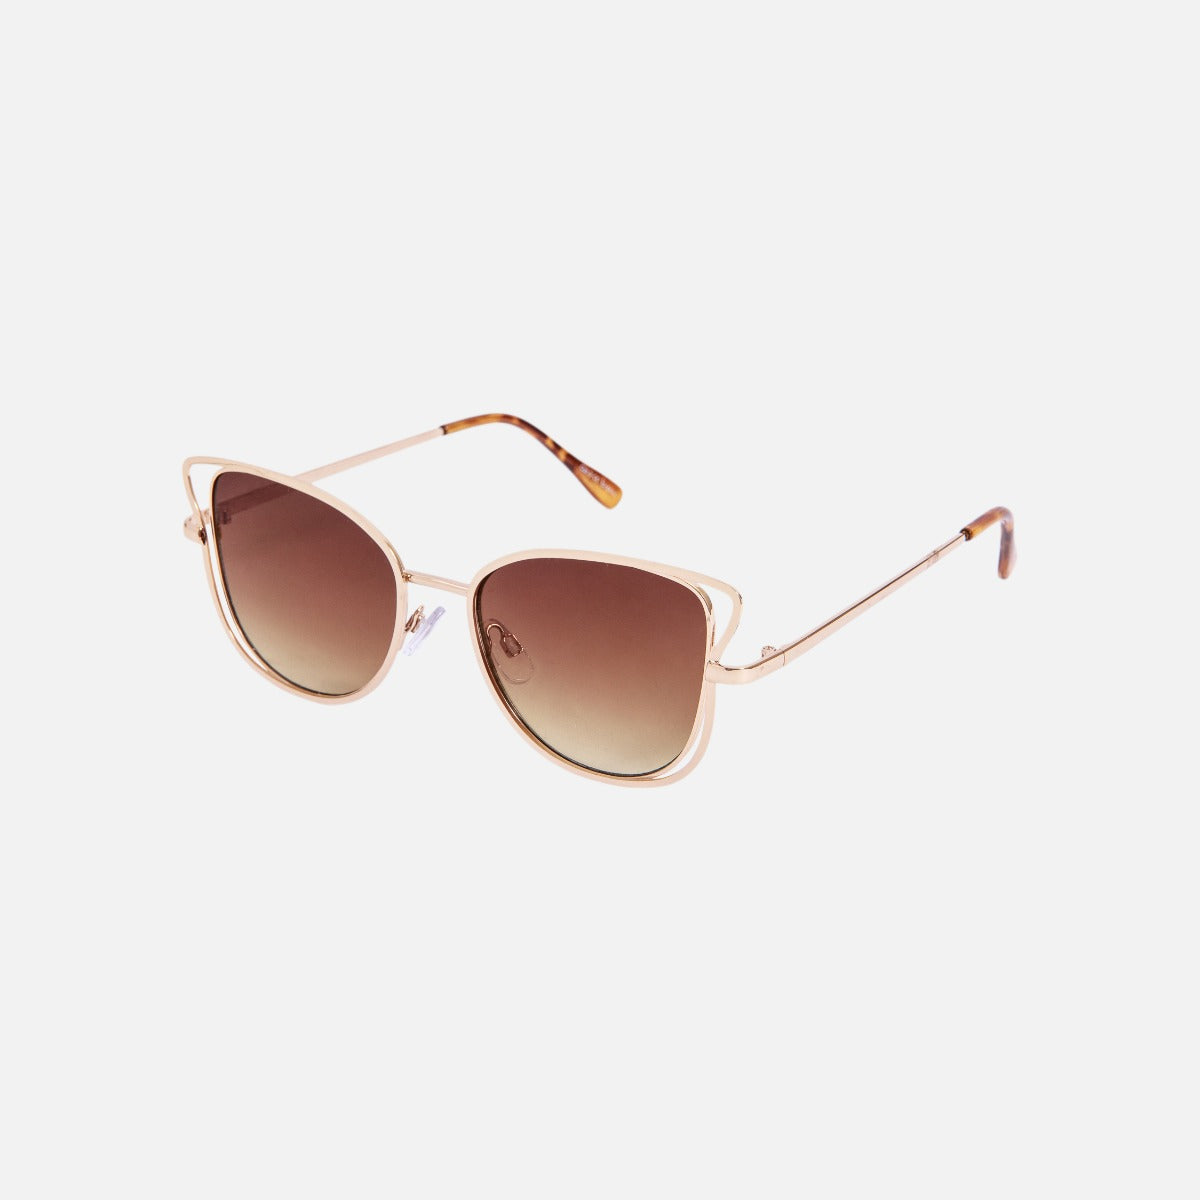 Butterfly frame sunglasses